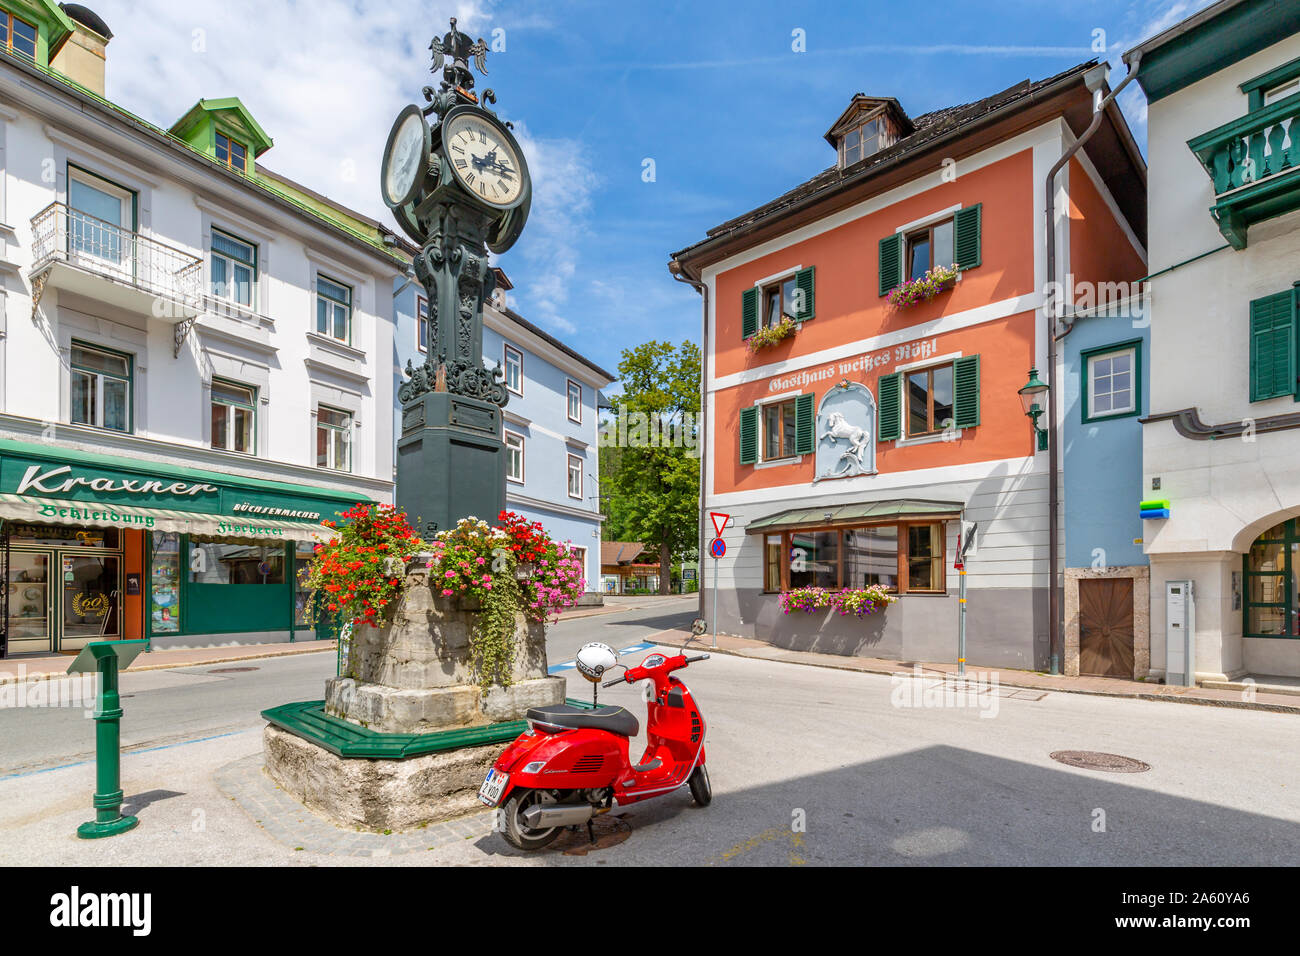 View of colourful buildings, red scooter and main street in Bad Aussie, Styria, Austria, Europe Stock Photo